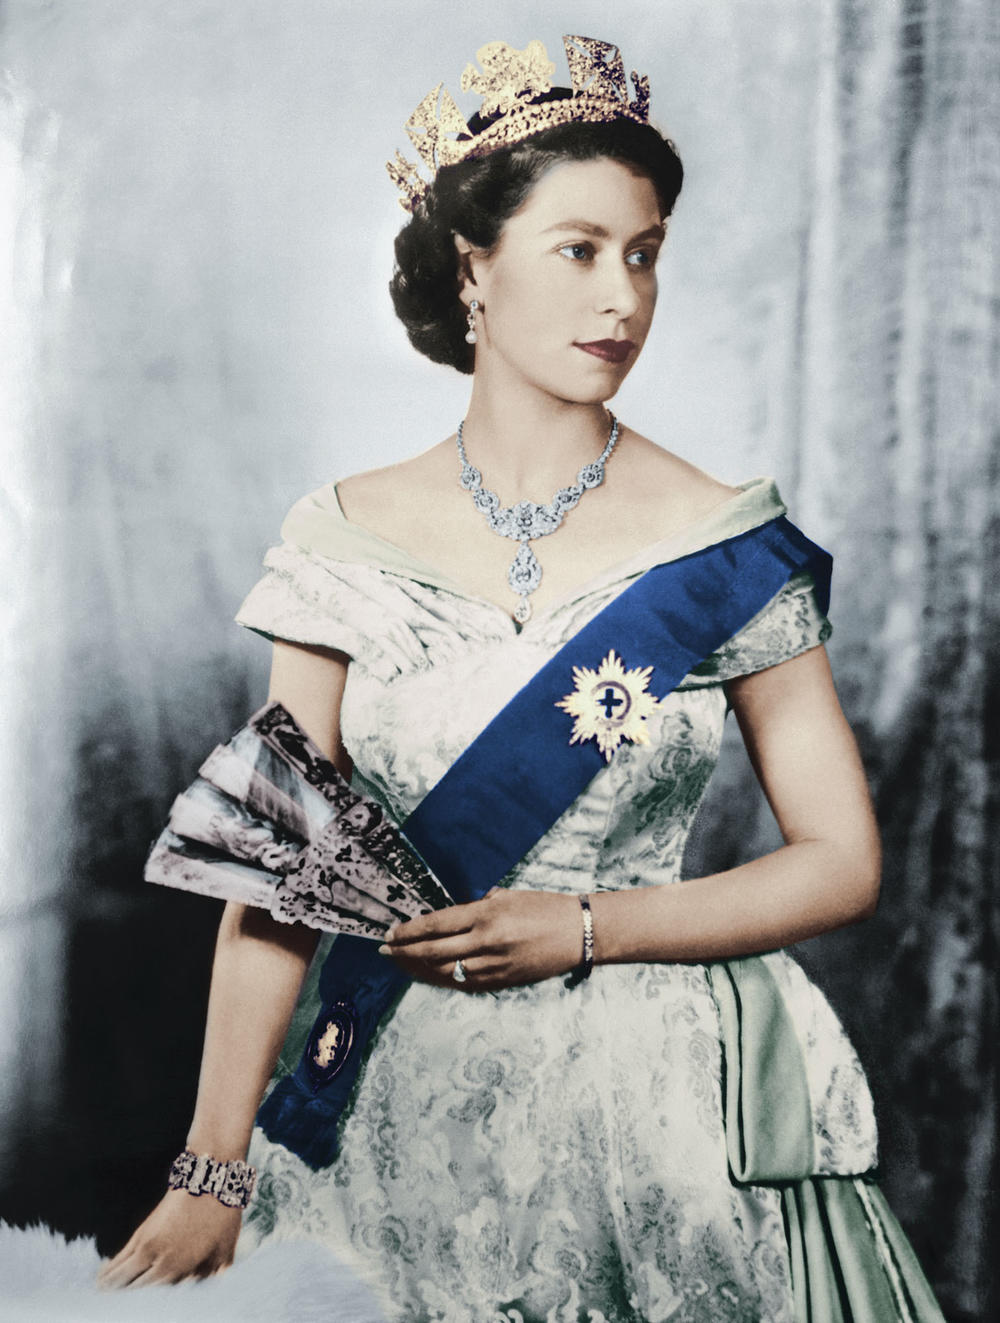 Queen Elizabeth II's portrait will no longer hang in a key gathering place at Oxford University's Magdalen College. Here is a portrait of the queen from early in her reign.